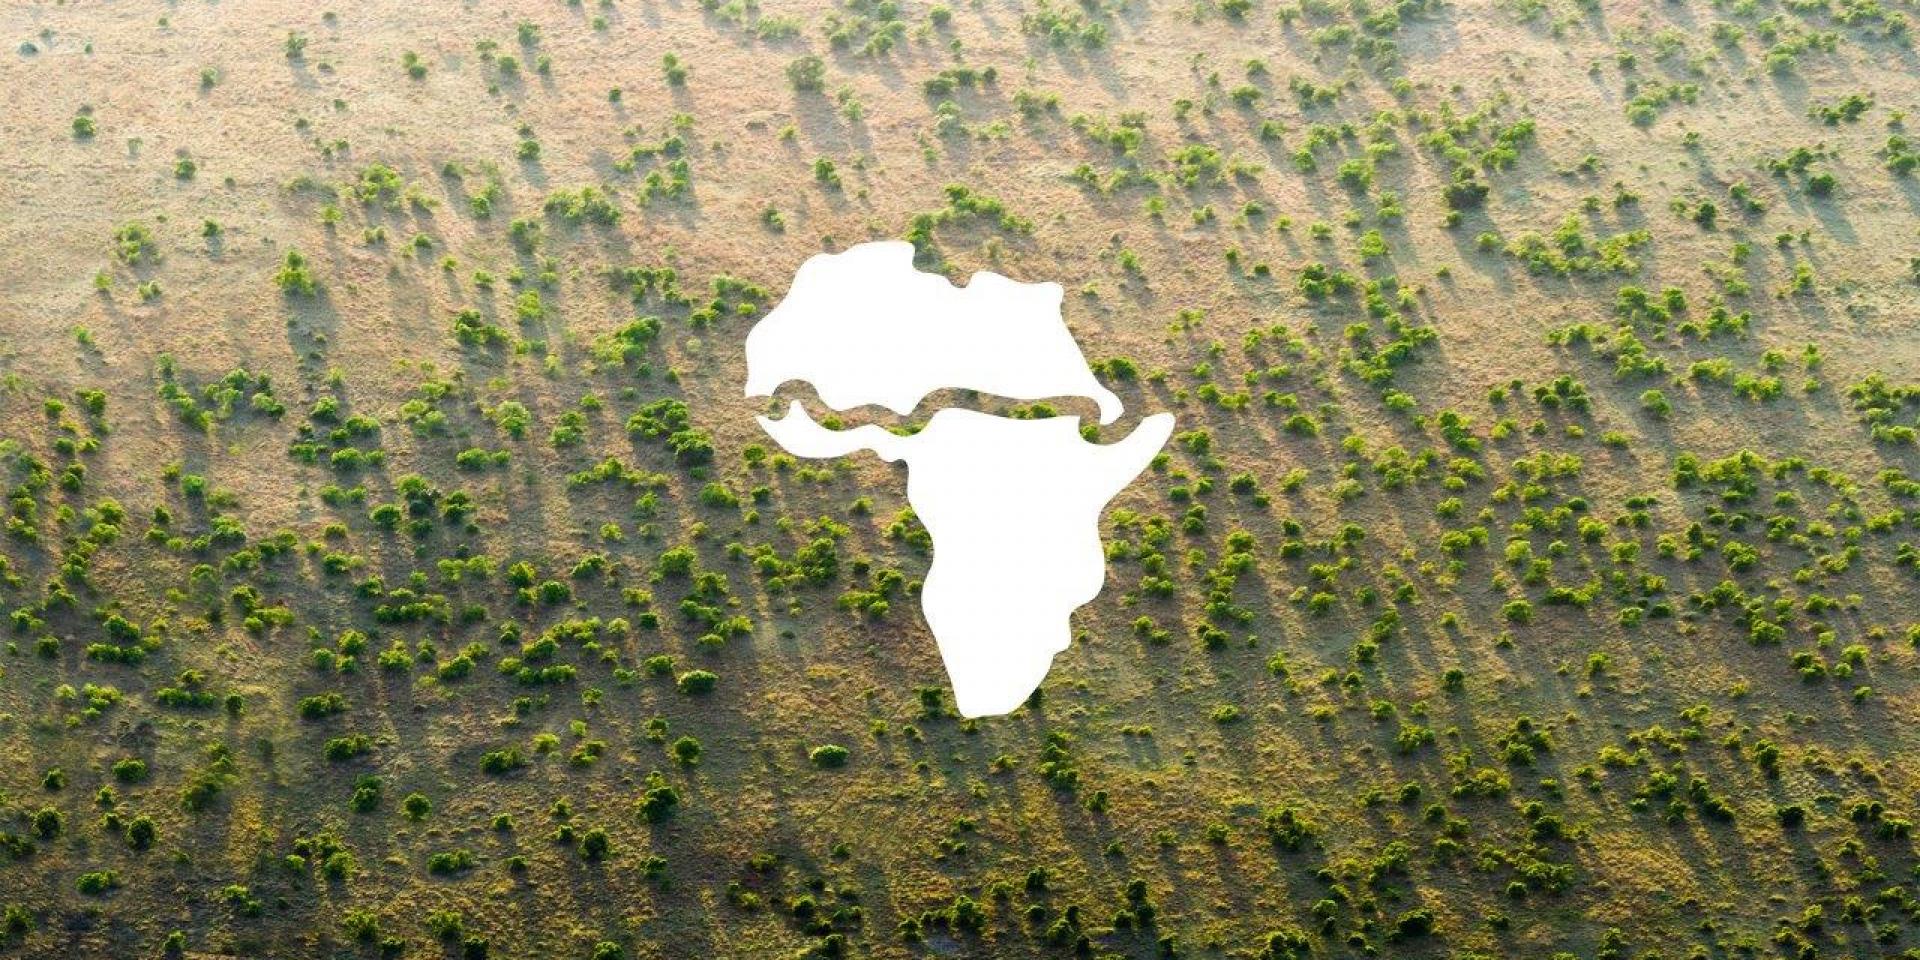 The Great Green Wall of Africa